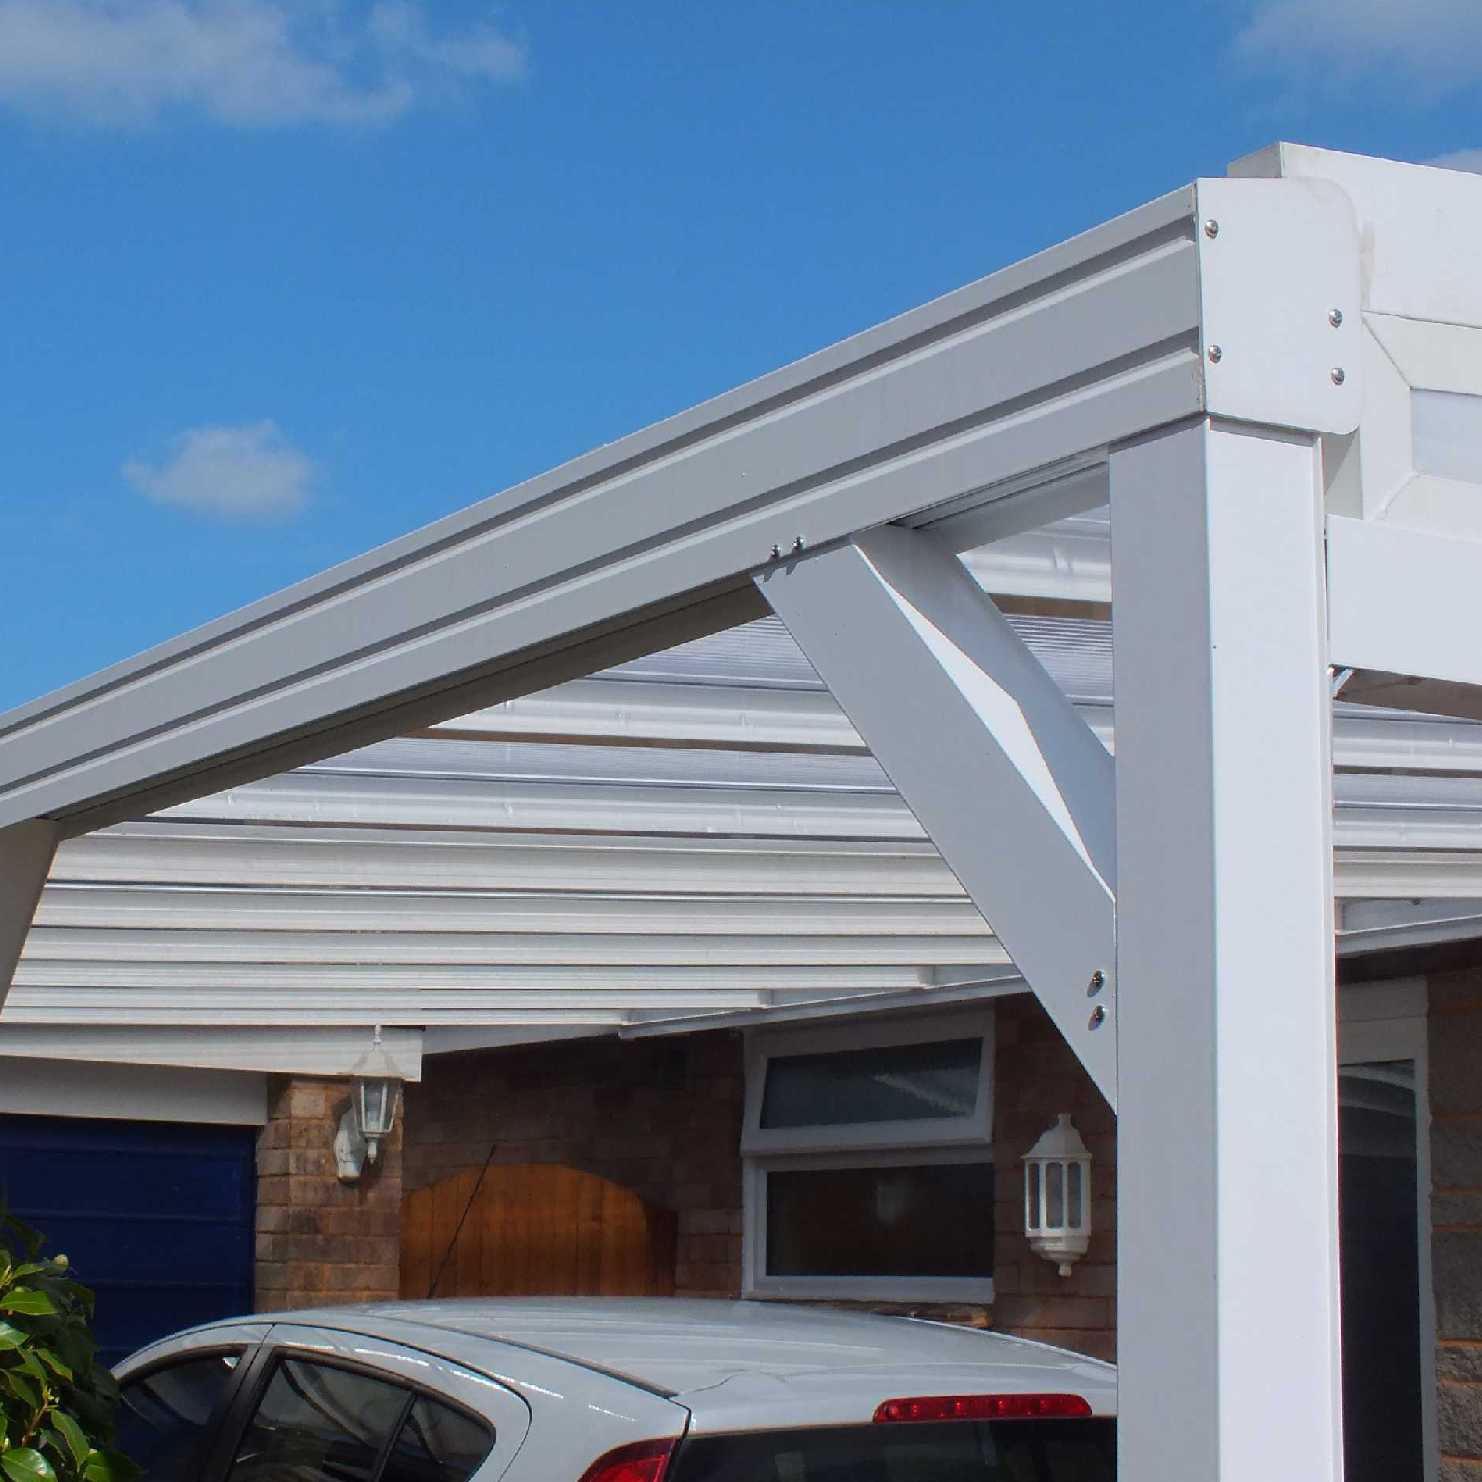 Buy Omega Smart Lean-To Canopy, White with 16mm Polycarbonate Glazing - 6.3m (W) x 1.5m (P), (4) Supporting Posts online today